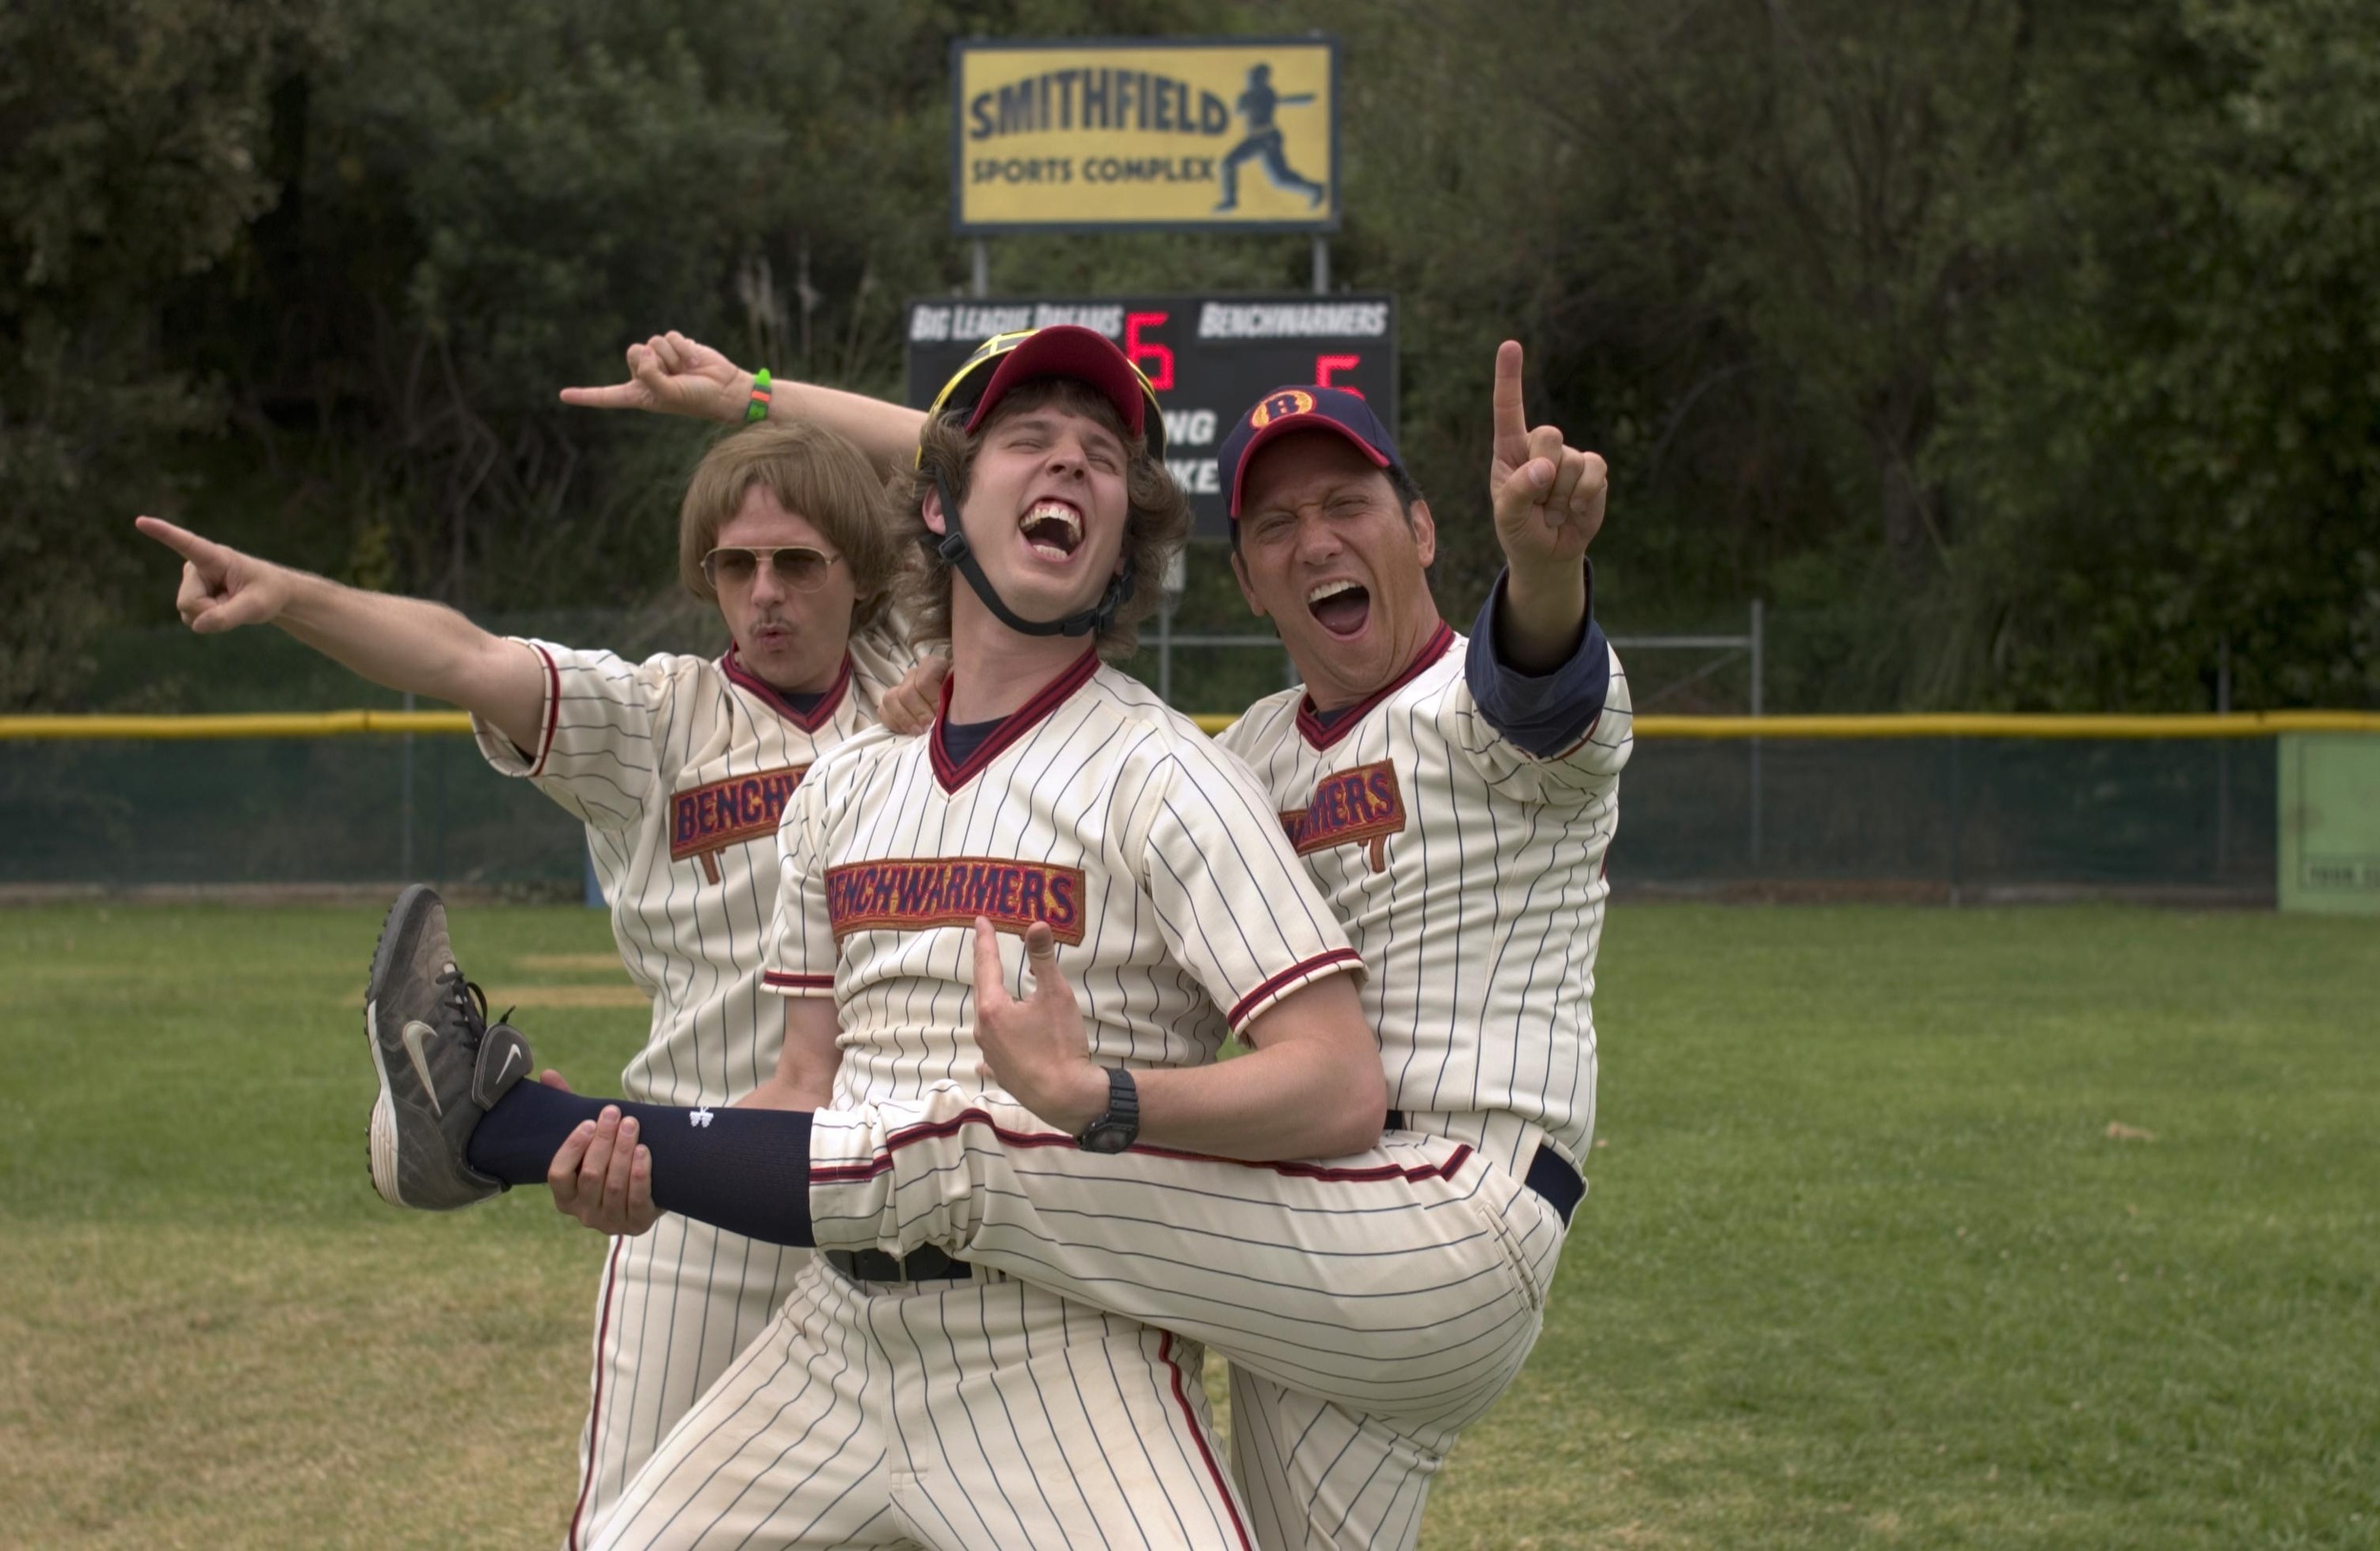 <p>Another Adam Sandler-produced project, <em>The Benchwarmers</em> was stupidly funny, and we wouldn't have it any other way! It's hard to hate on a film where it was just a bunch of friends hanging out and having fun, but critics always find a way. Again, most Sandler films are in no way masterpieces and should not be critiqued as such. In middle school, this movie was one of the funniest things we had ever seen, especially with Napoleon Dynamite himself (Jon Heder) joining the crew. If the movie becomes an inside joke with you and your friends, it's a keeper.</p><p>You may also like: <a href='https://www.yardbarker.com/entertainment/articles/20_facts_you_might_not_know_about_a_christmas_story_120823/s1__36675317'>20 facts you might not know about 'A Christmas Story'</a></p>